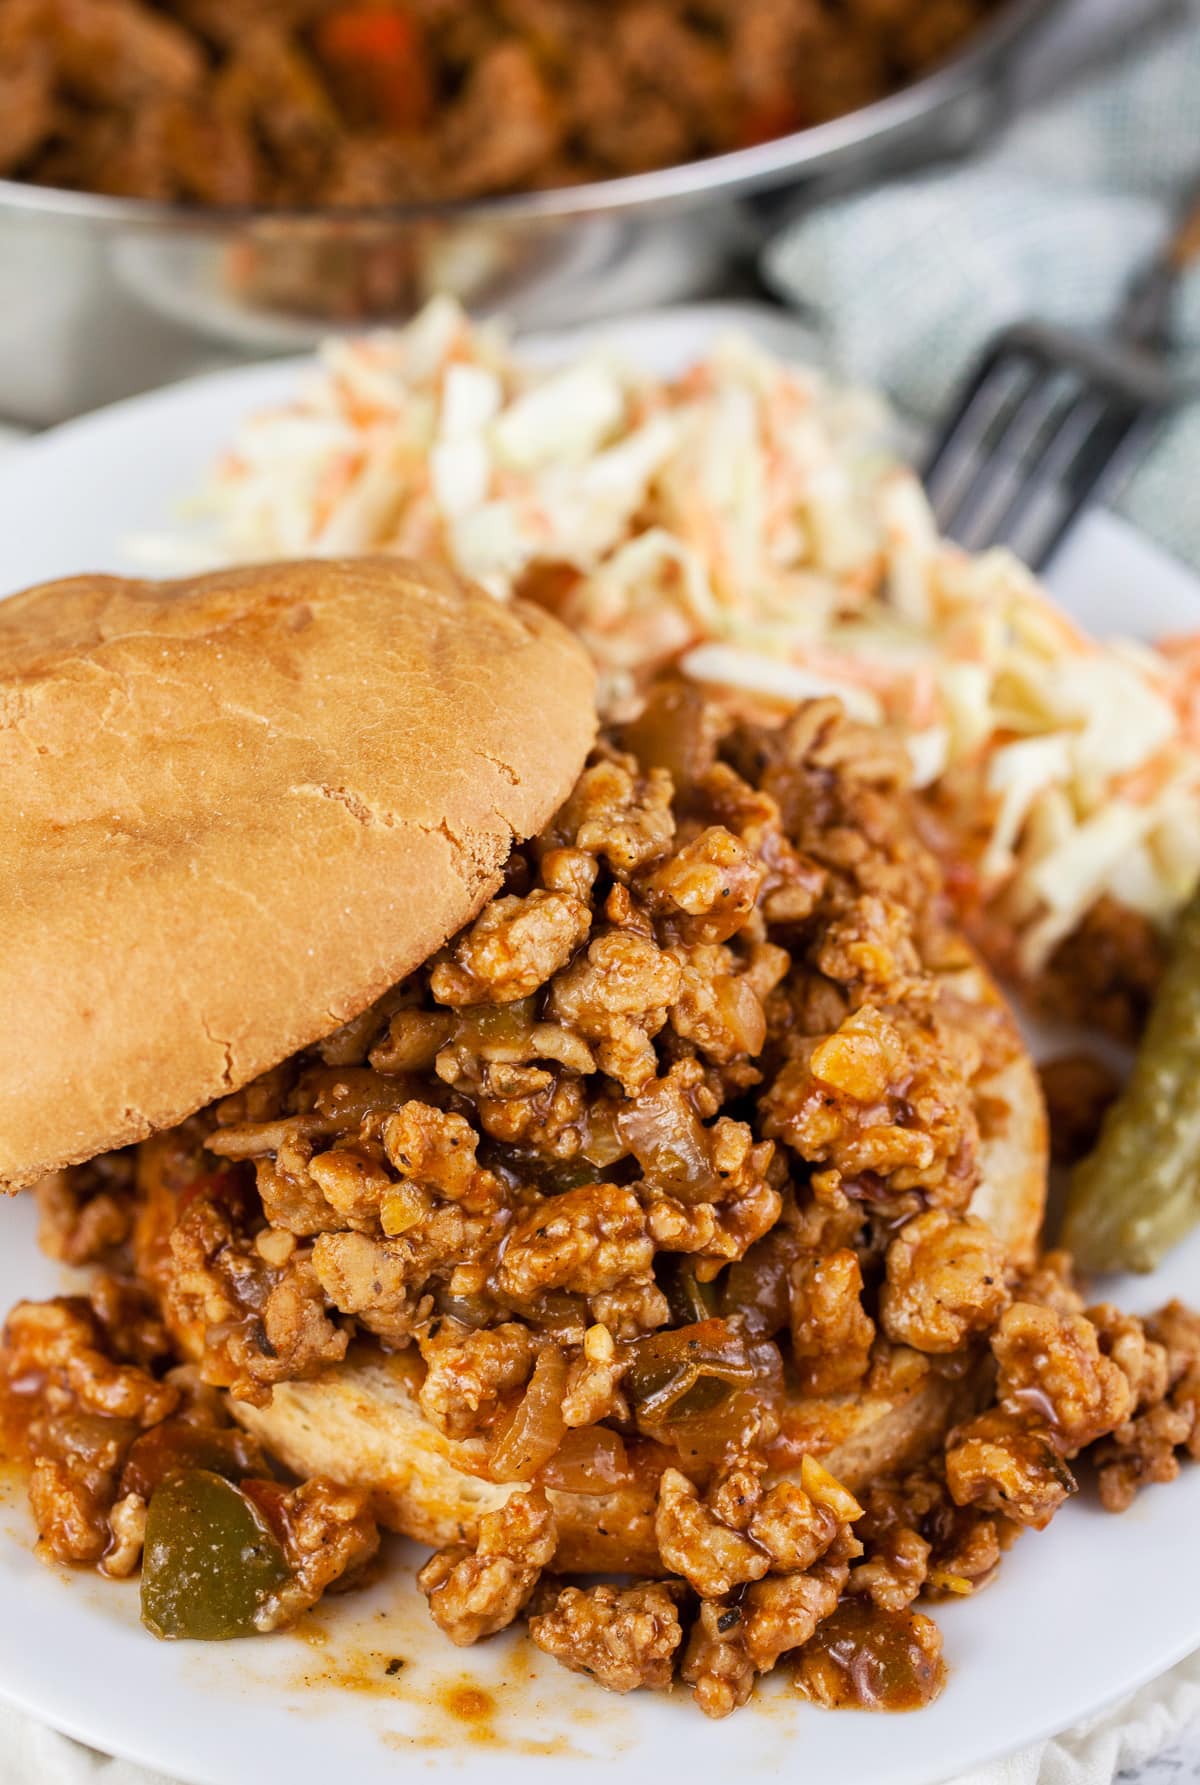 Ground chicken sloppy joes with coleslaw and pickle.